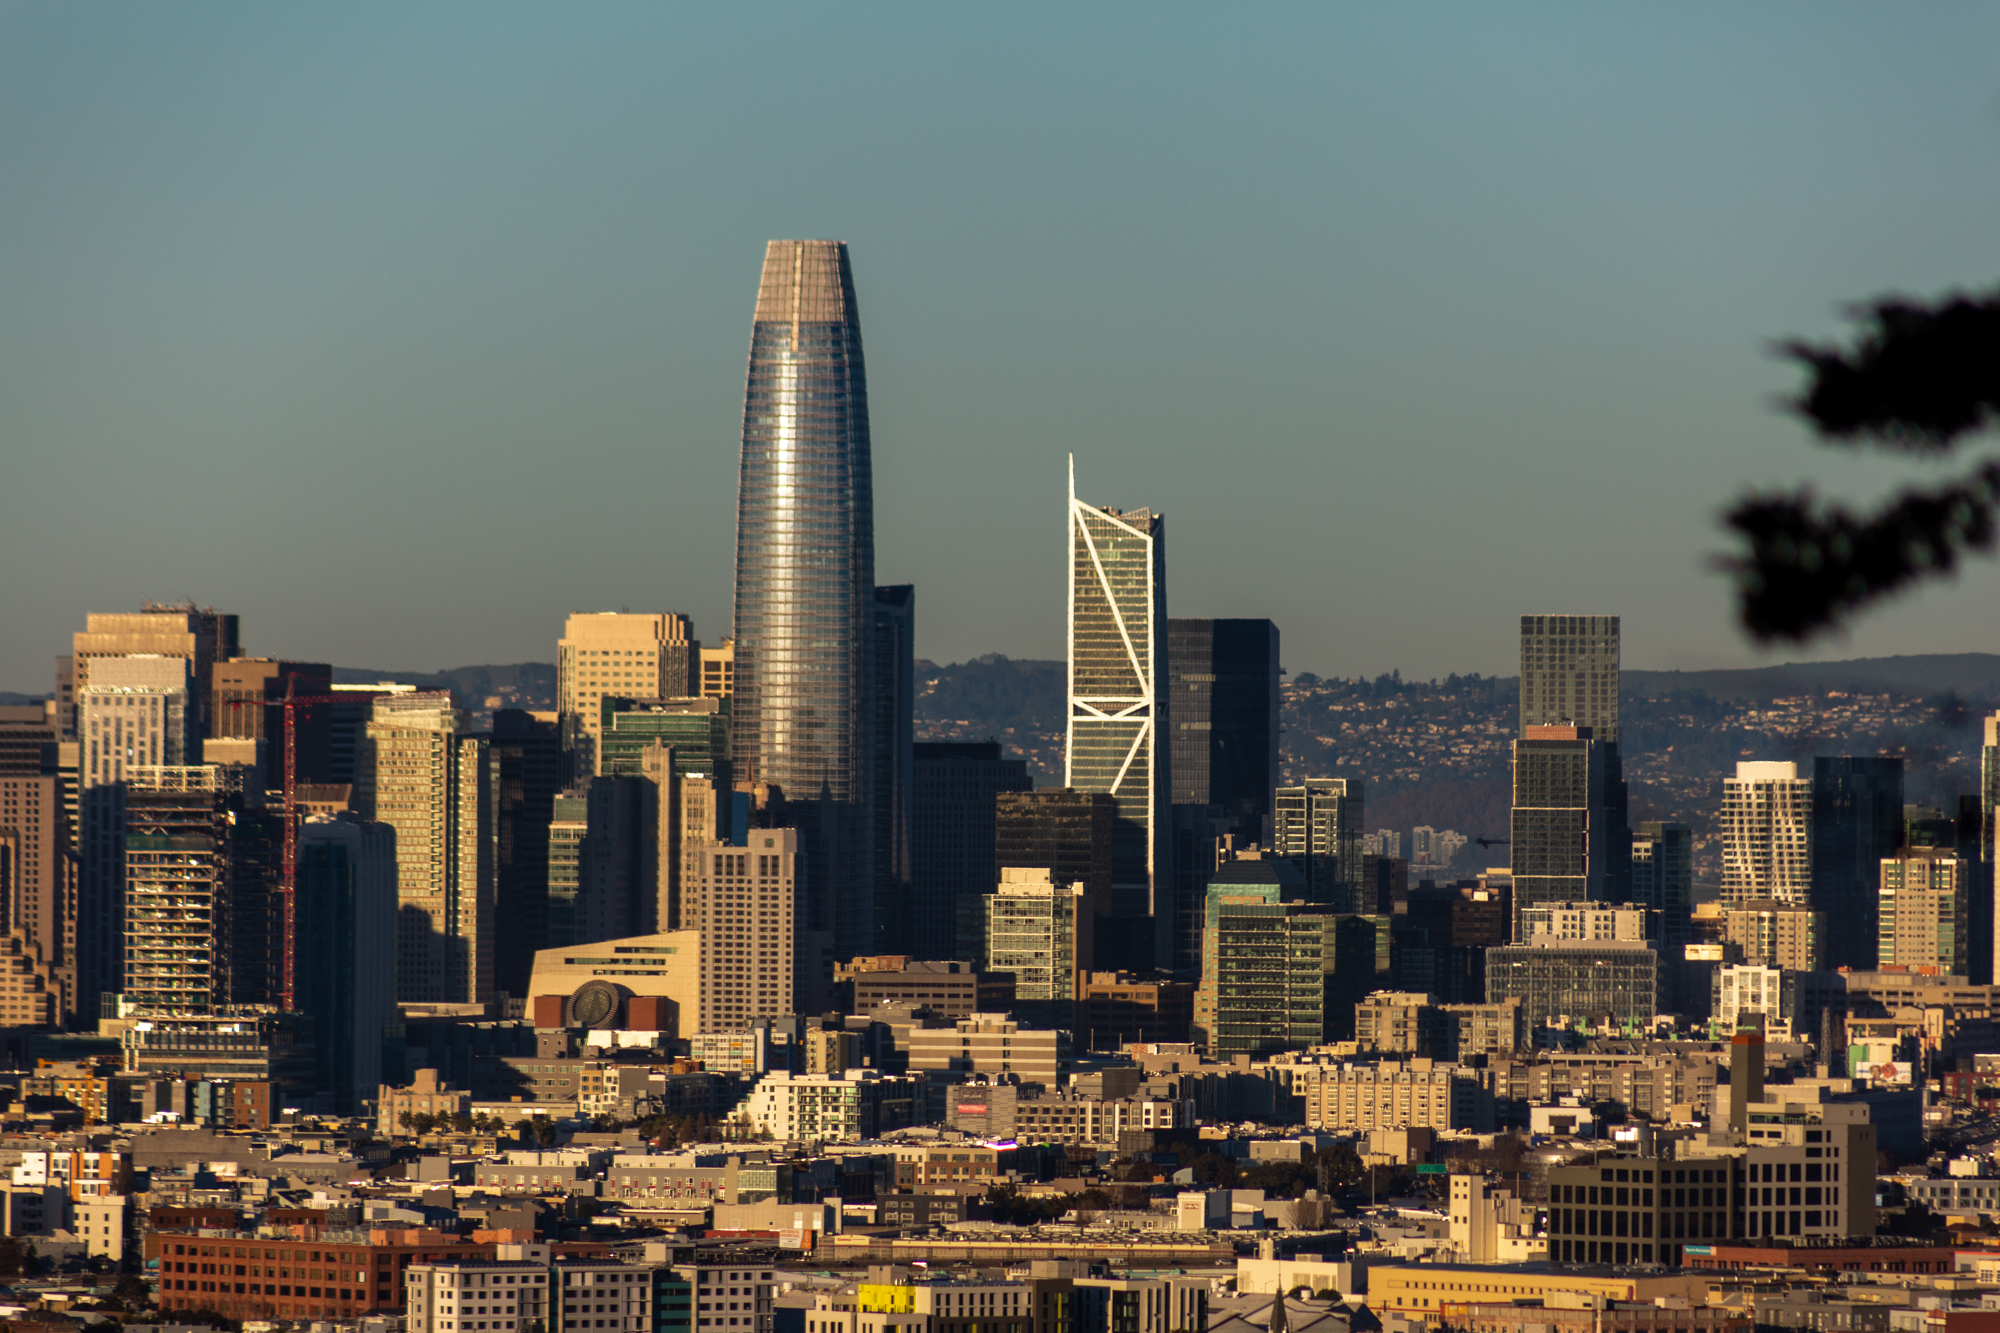 181 Fremont Street in the city skyline, seen beside the Salesforce Tower, image by Andrew Campbell Nelson